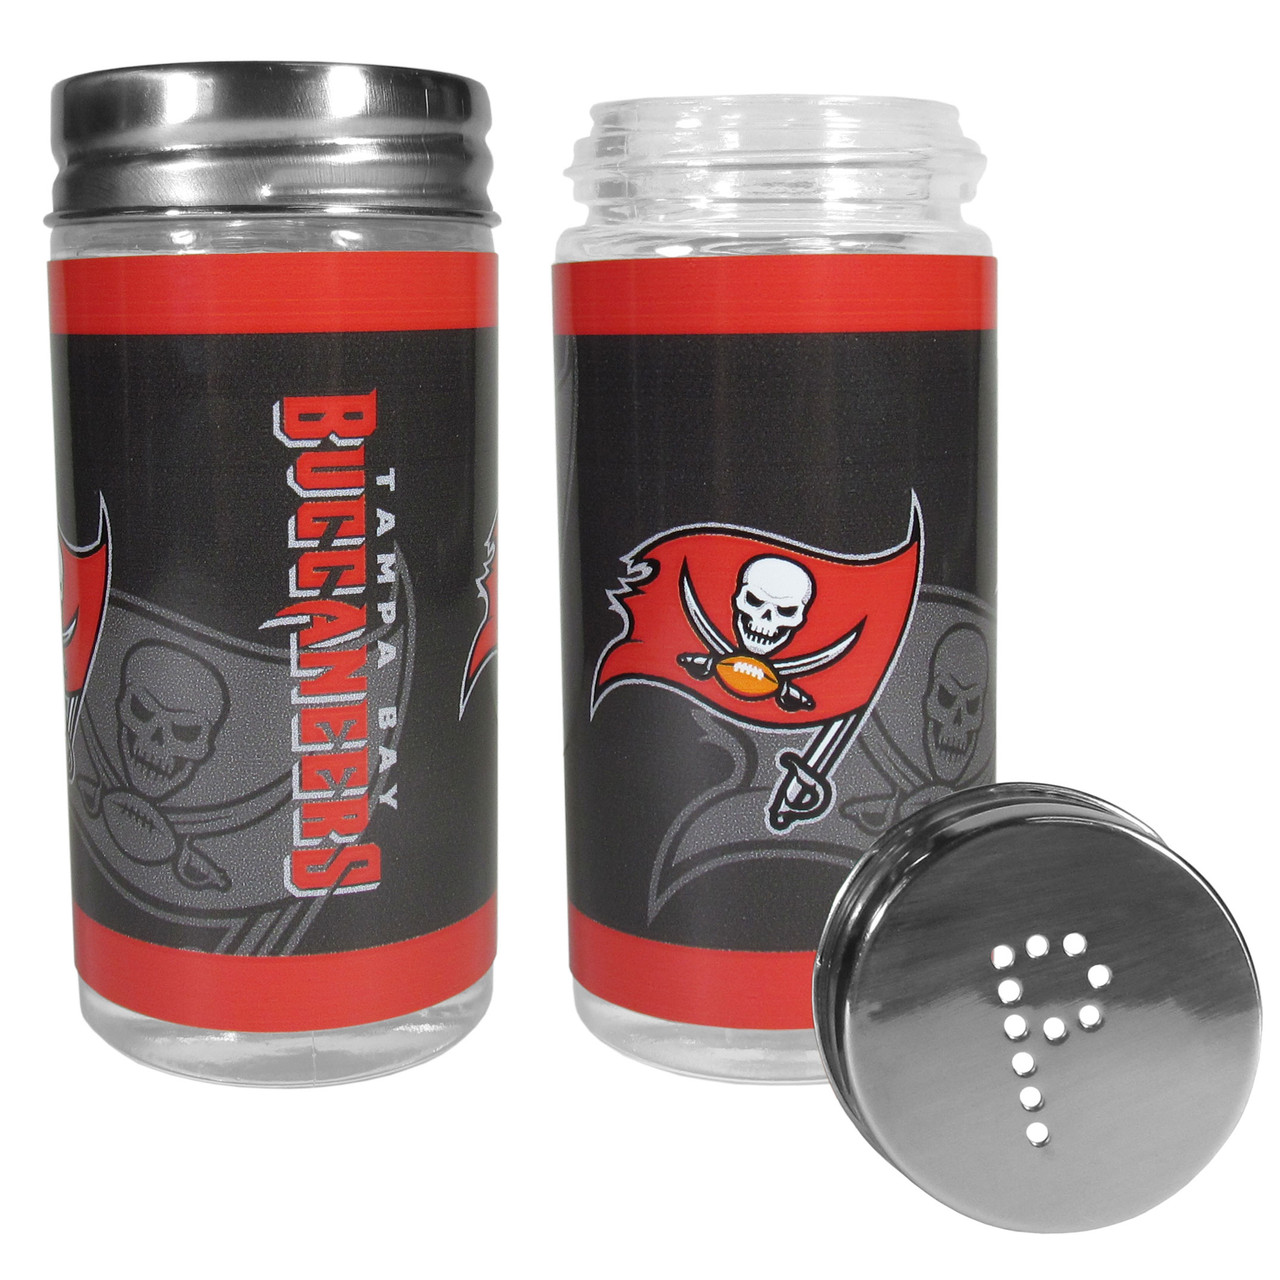 Siskiyou Tampa Bay Buccaneers Salt and Pepper Shakers Tailgater